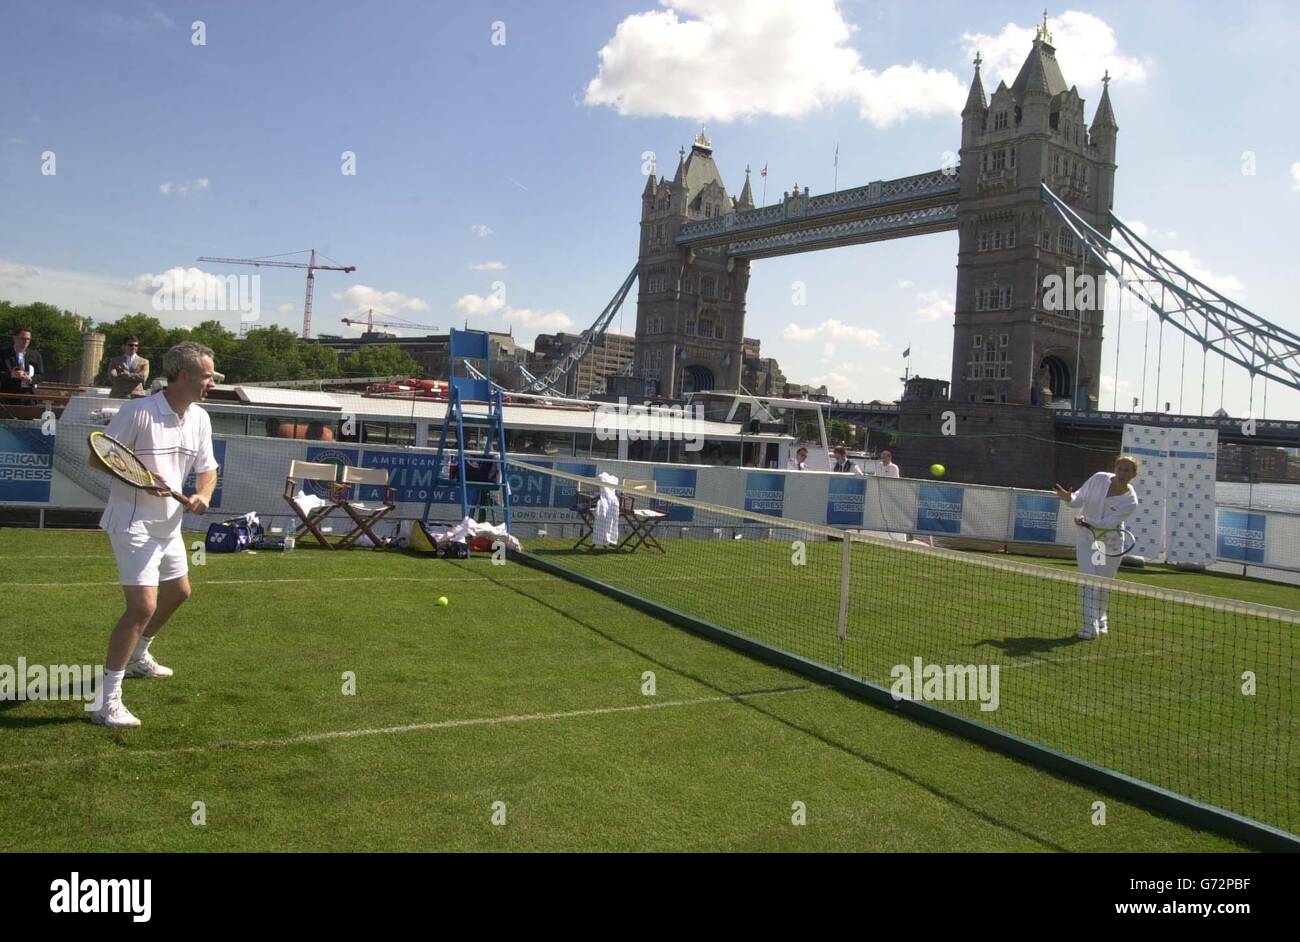 Tennis stars John McEnroe in action against Monica Seles play tennis on a floating court on the River Thames in London. The court is traveling from Waterloo Pier to London's Tower Bridge aboard a barge. Stock Photo